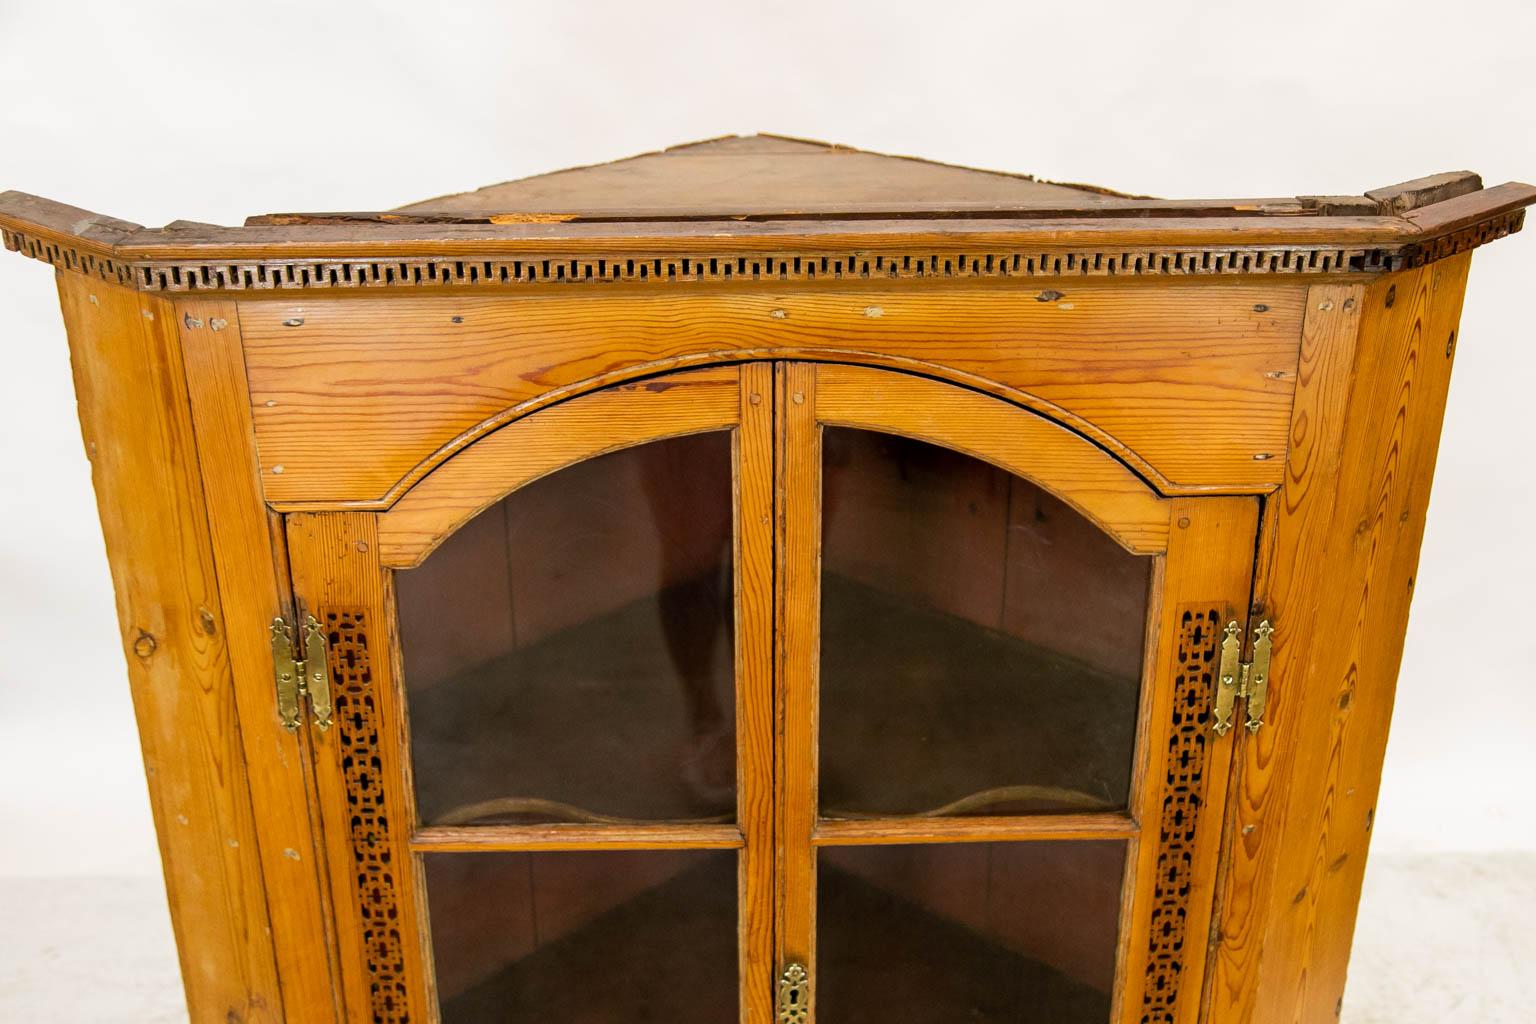 This corner cupboard has exposed peg construction. The cornice has the original wall of Troy molding. The front stiles have pierced open work carvings. The interior shelves have two fixed butterfly shelves. The blown glass is original.